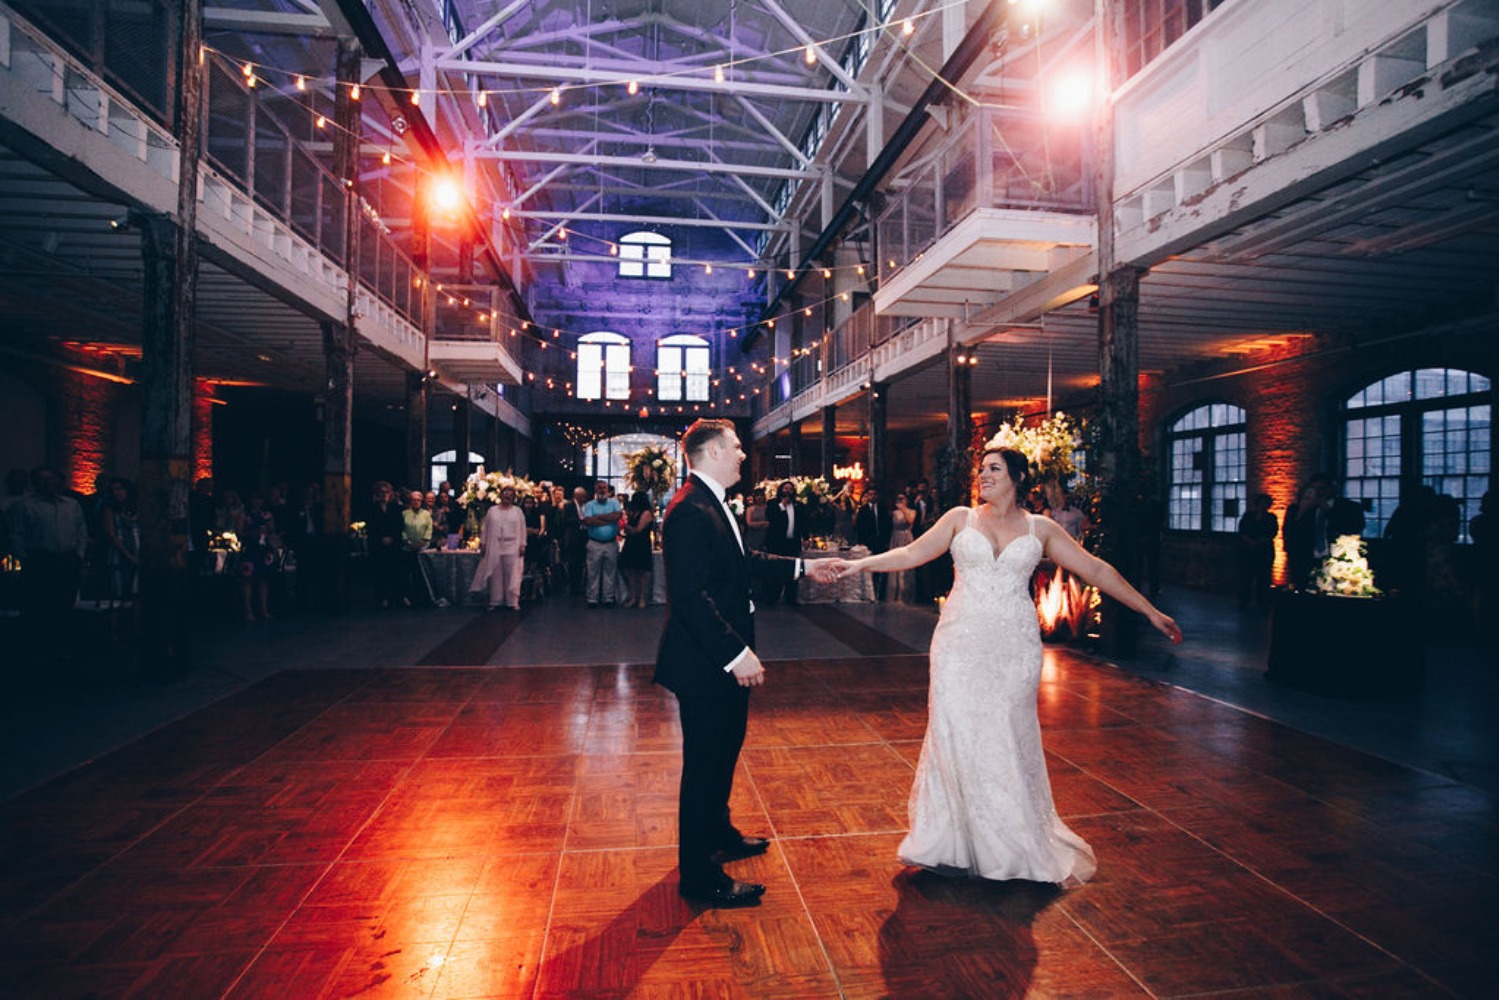 first wedding dance at Roebling Wire Works